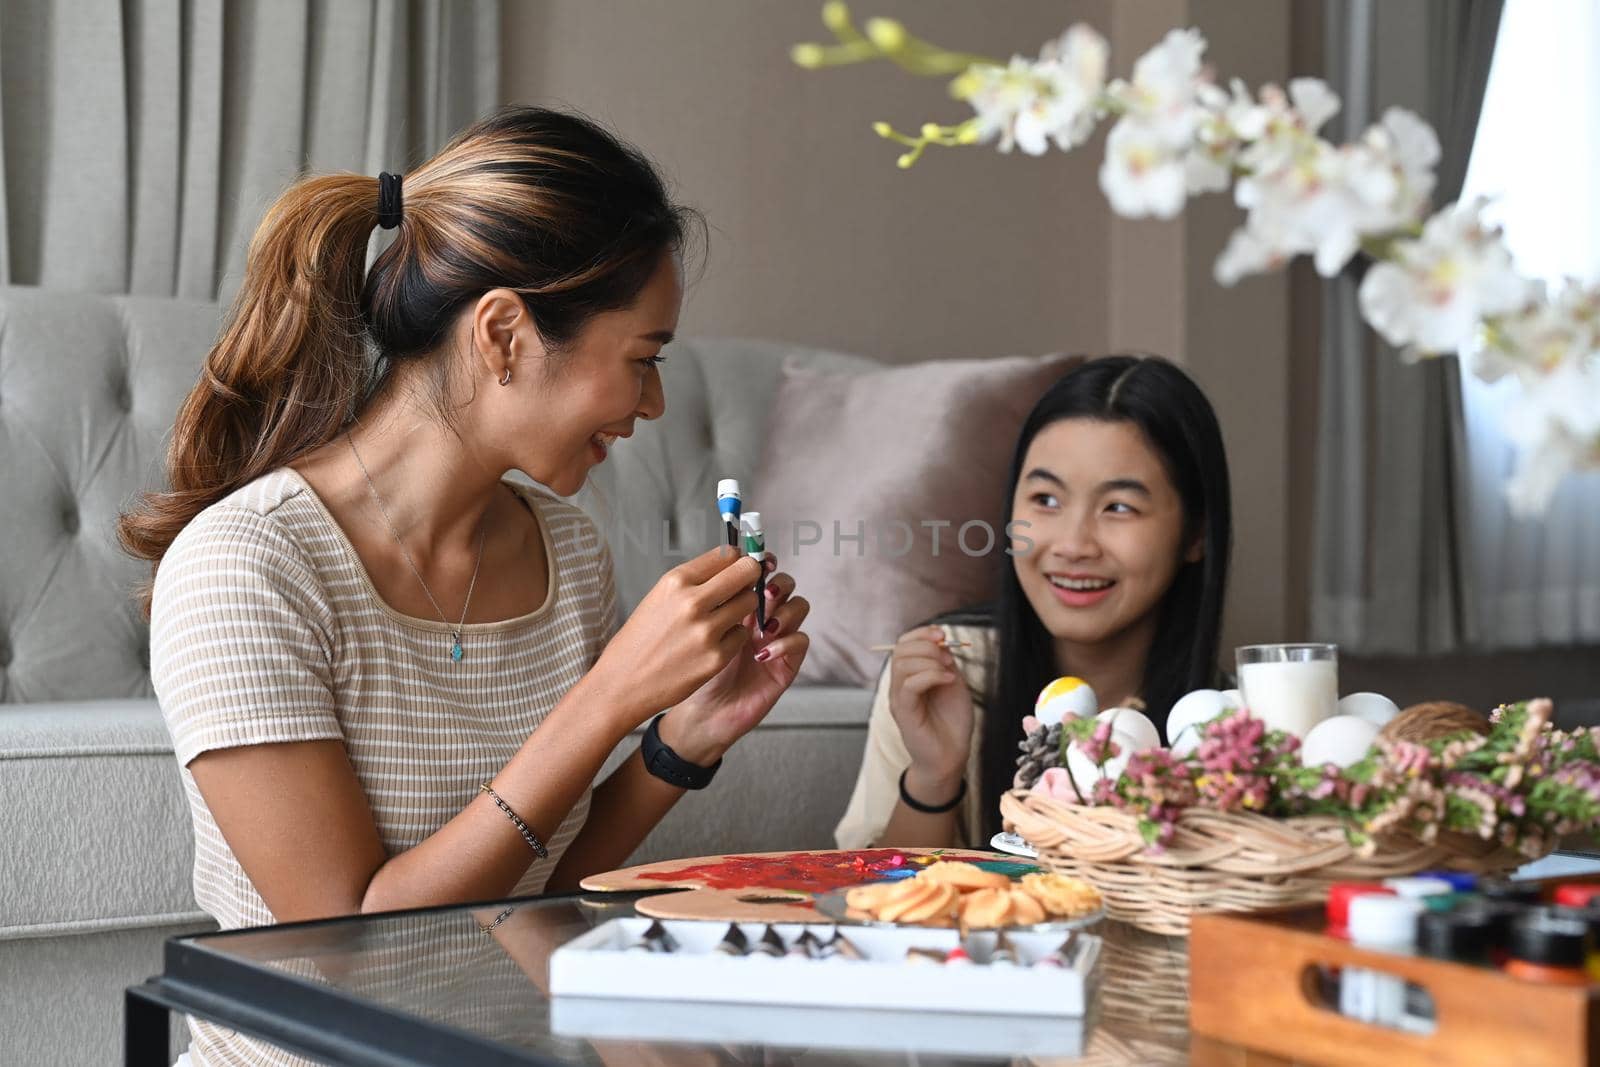 Happy girl and mother talking each other while painting Easter eggs together at home. Easter holidays and people concept.